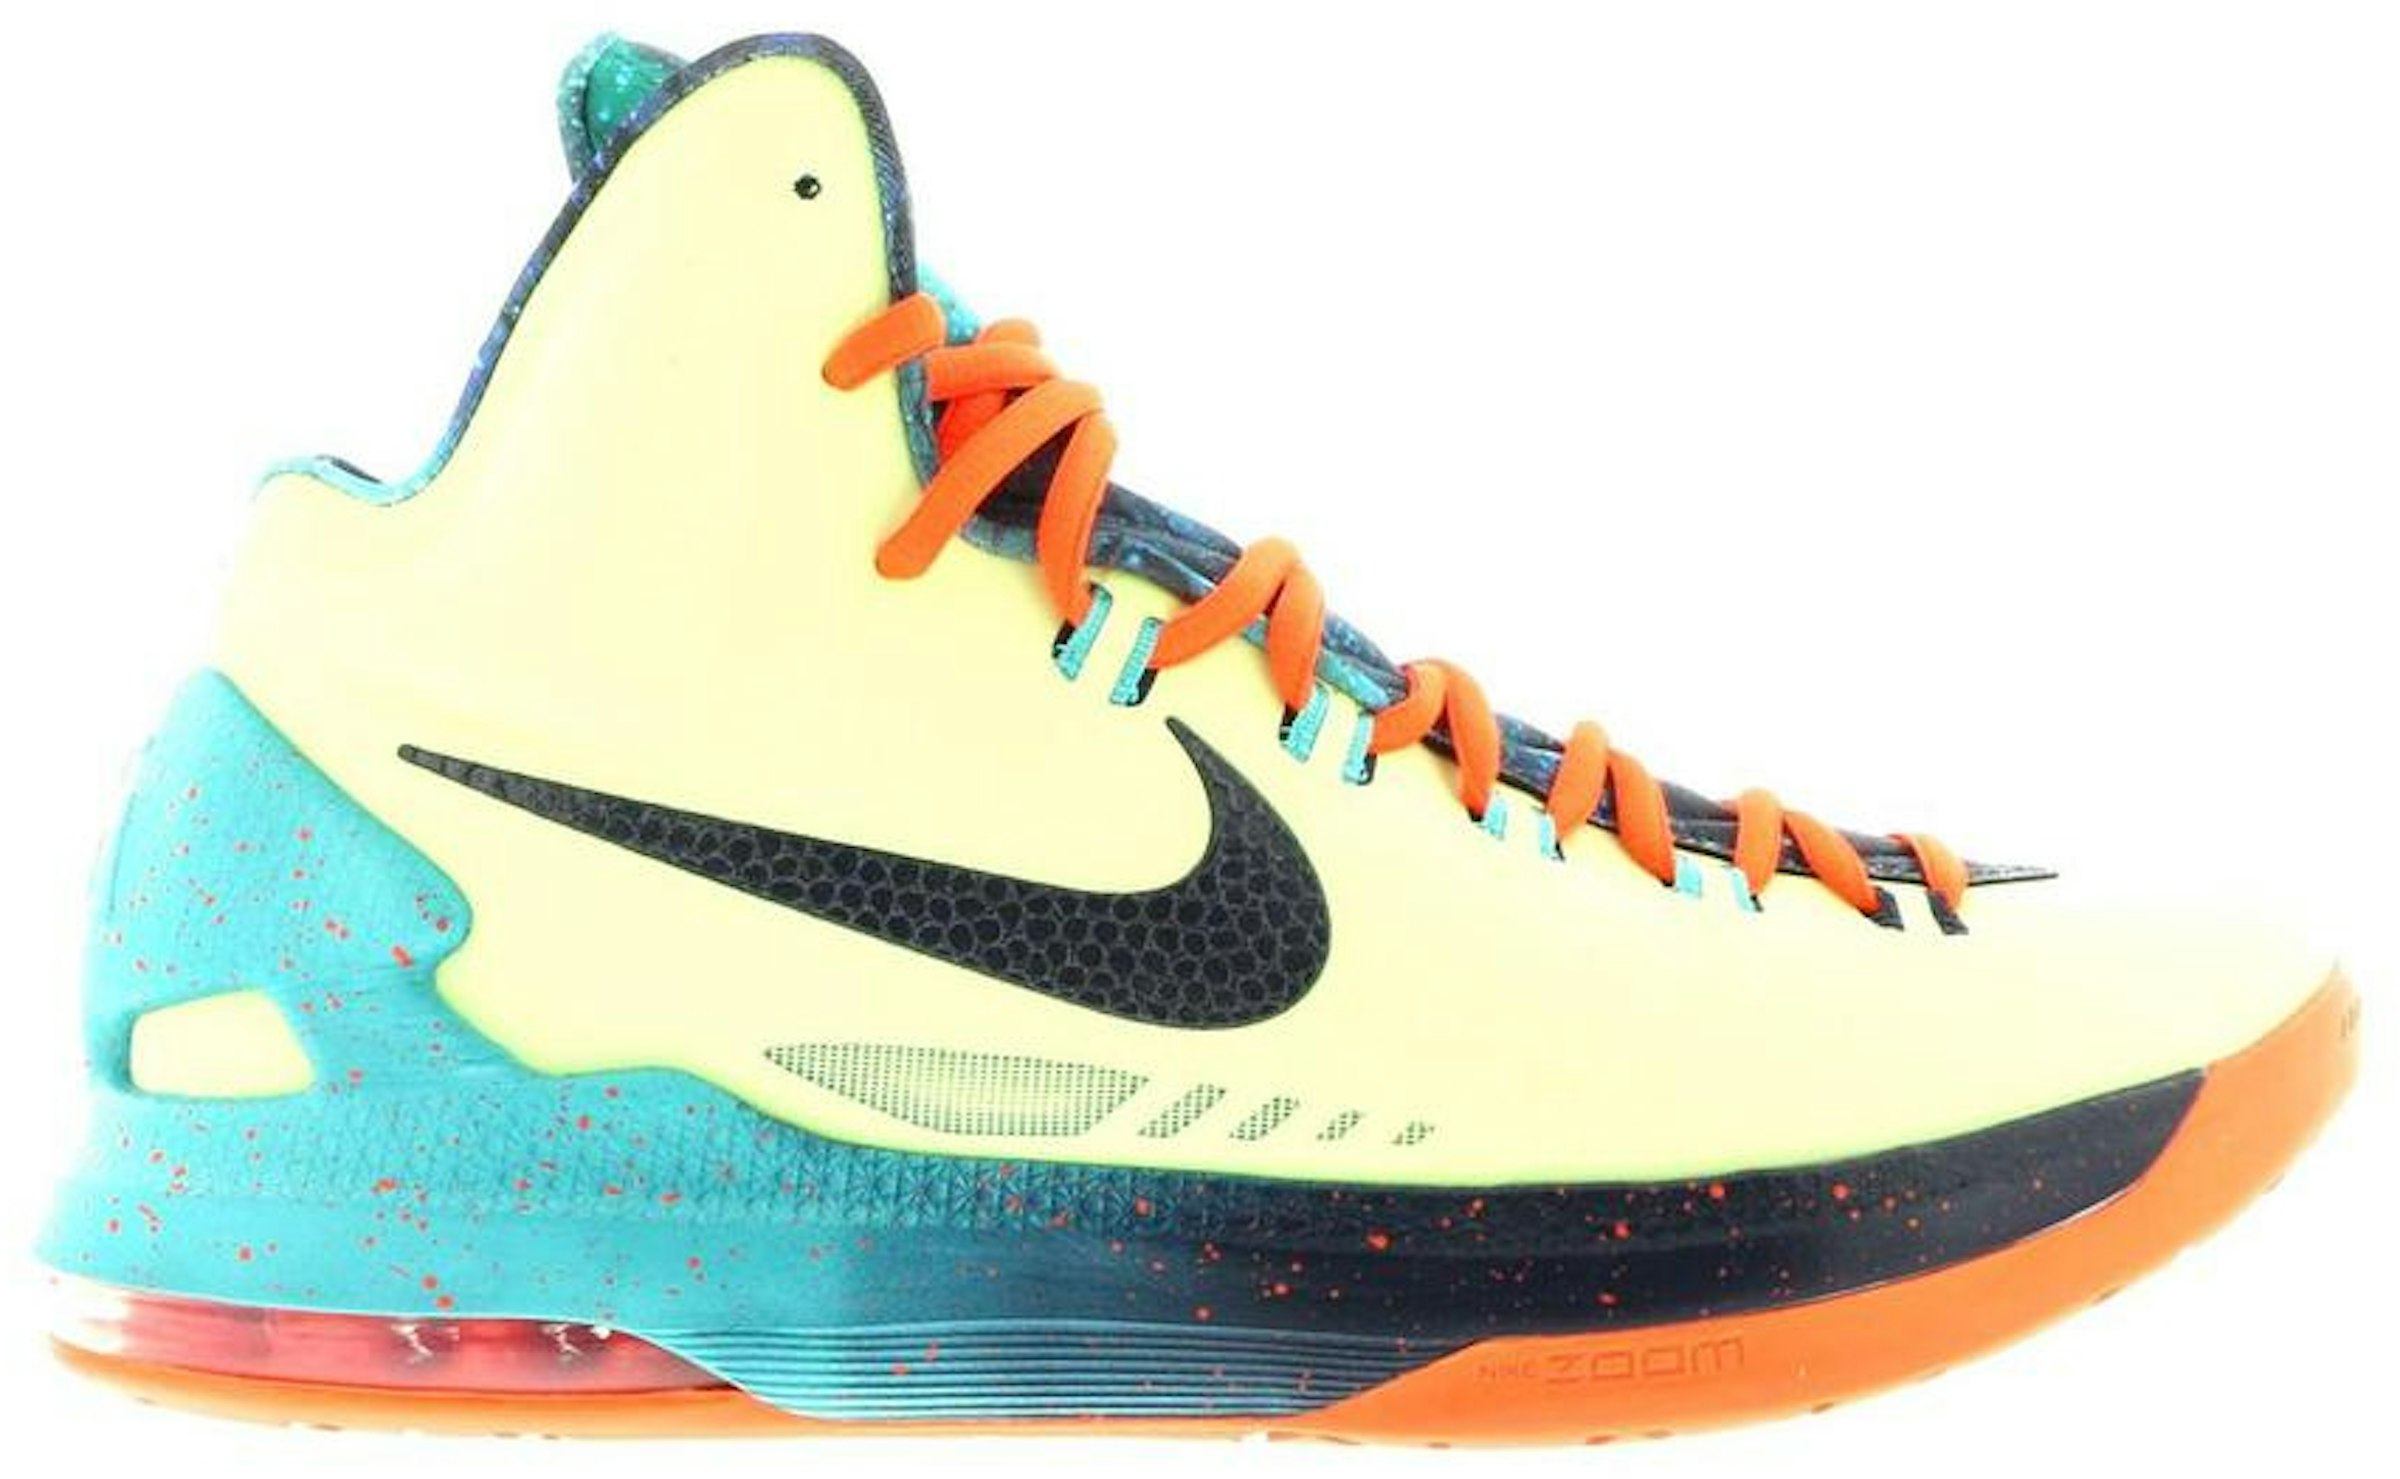 Nike KD 5 All-Star Area 72 - 583111-300 - US